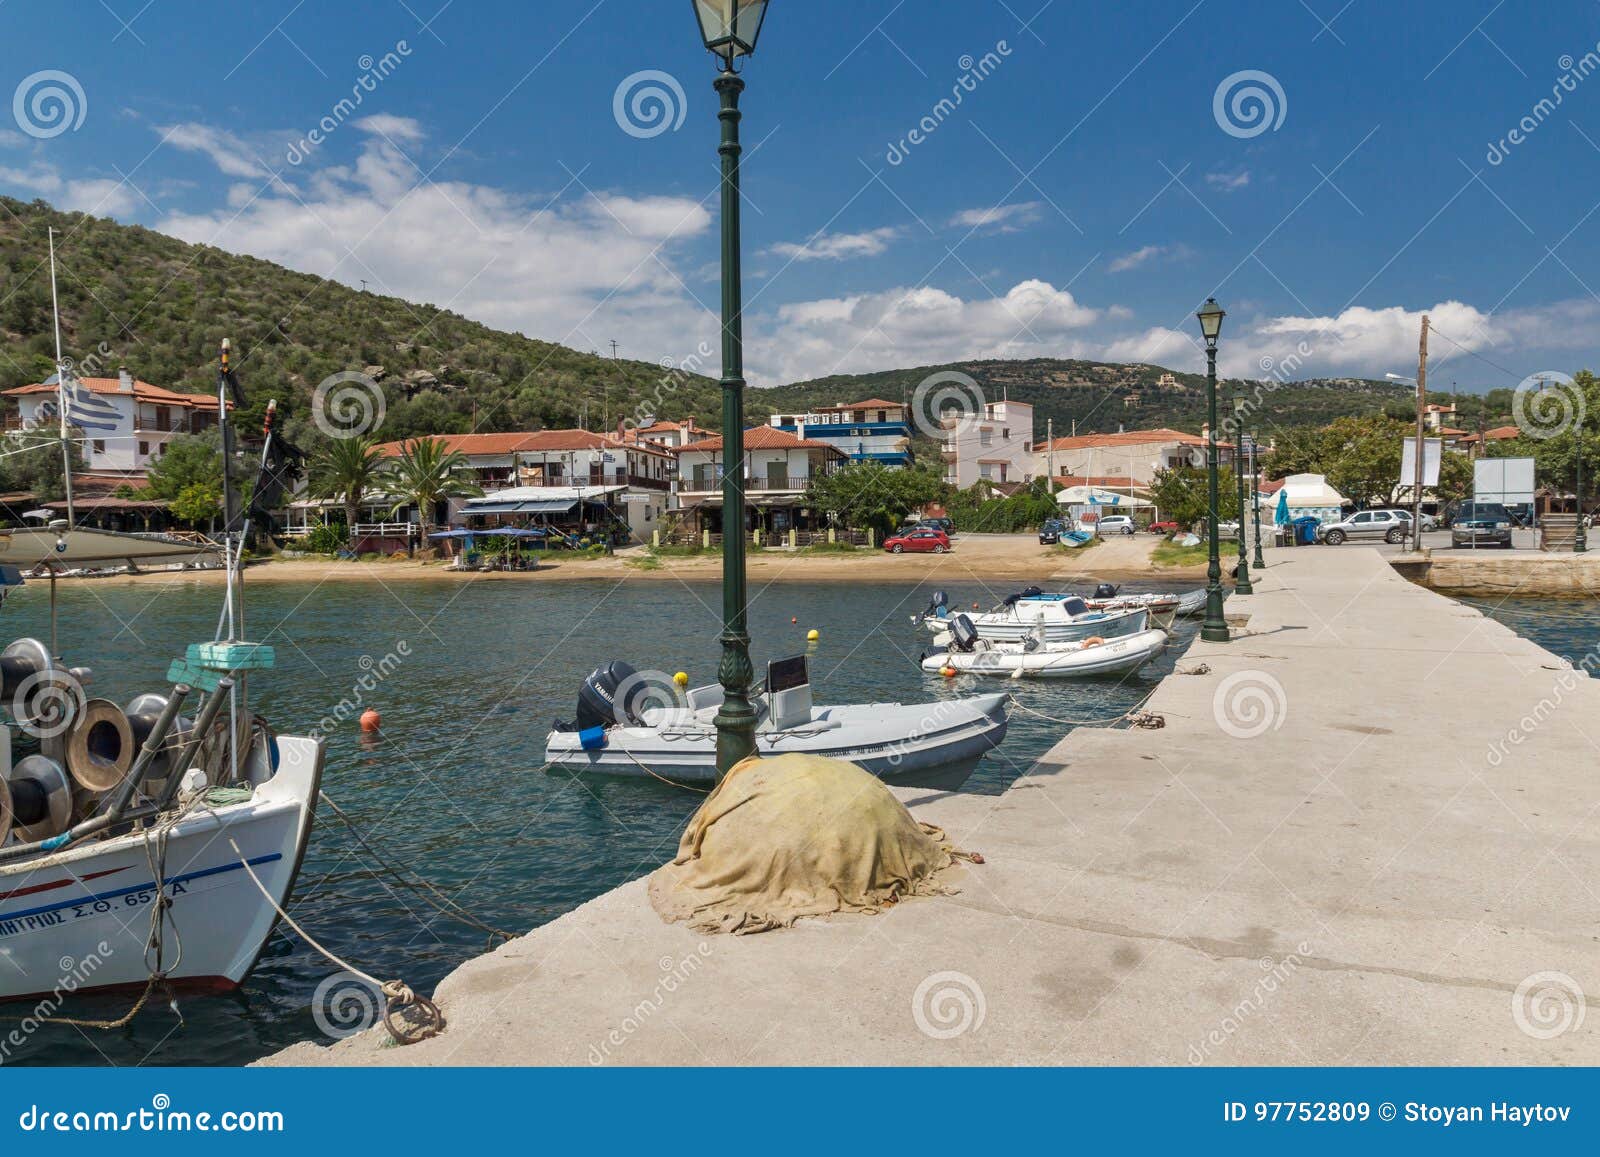 CHALKIDIKI, CENTRAL MACEDONIA, GREECE - AUGUST 26, 2014: Panoramic View ...